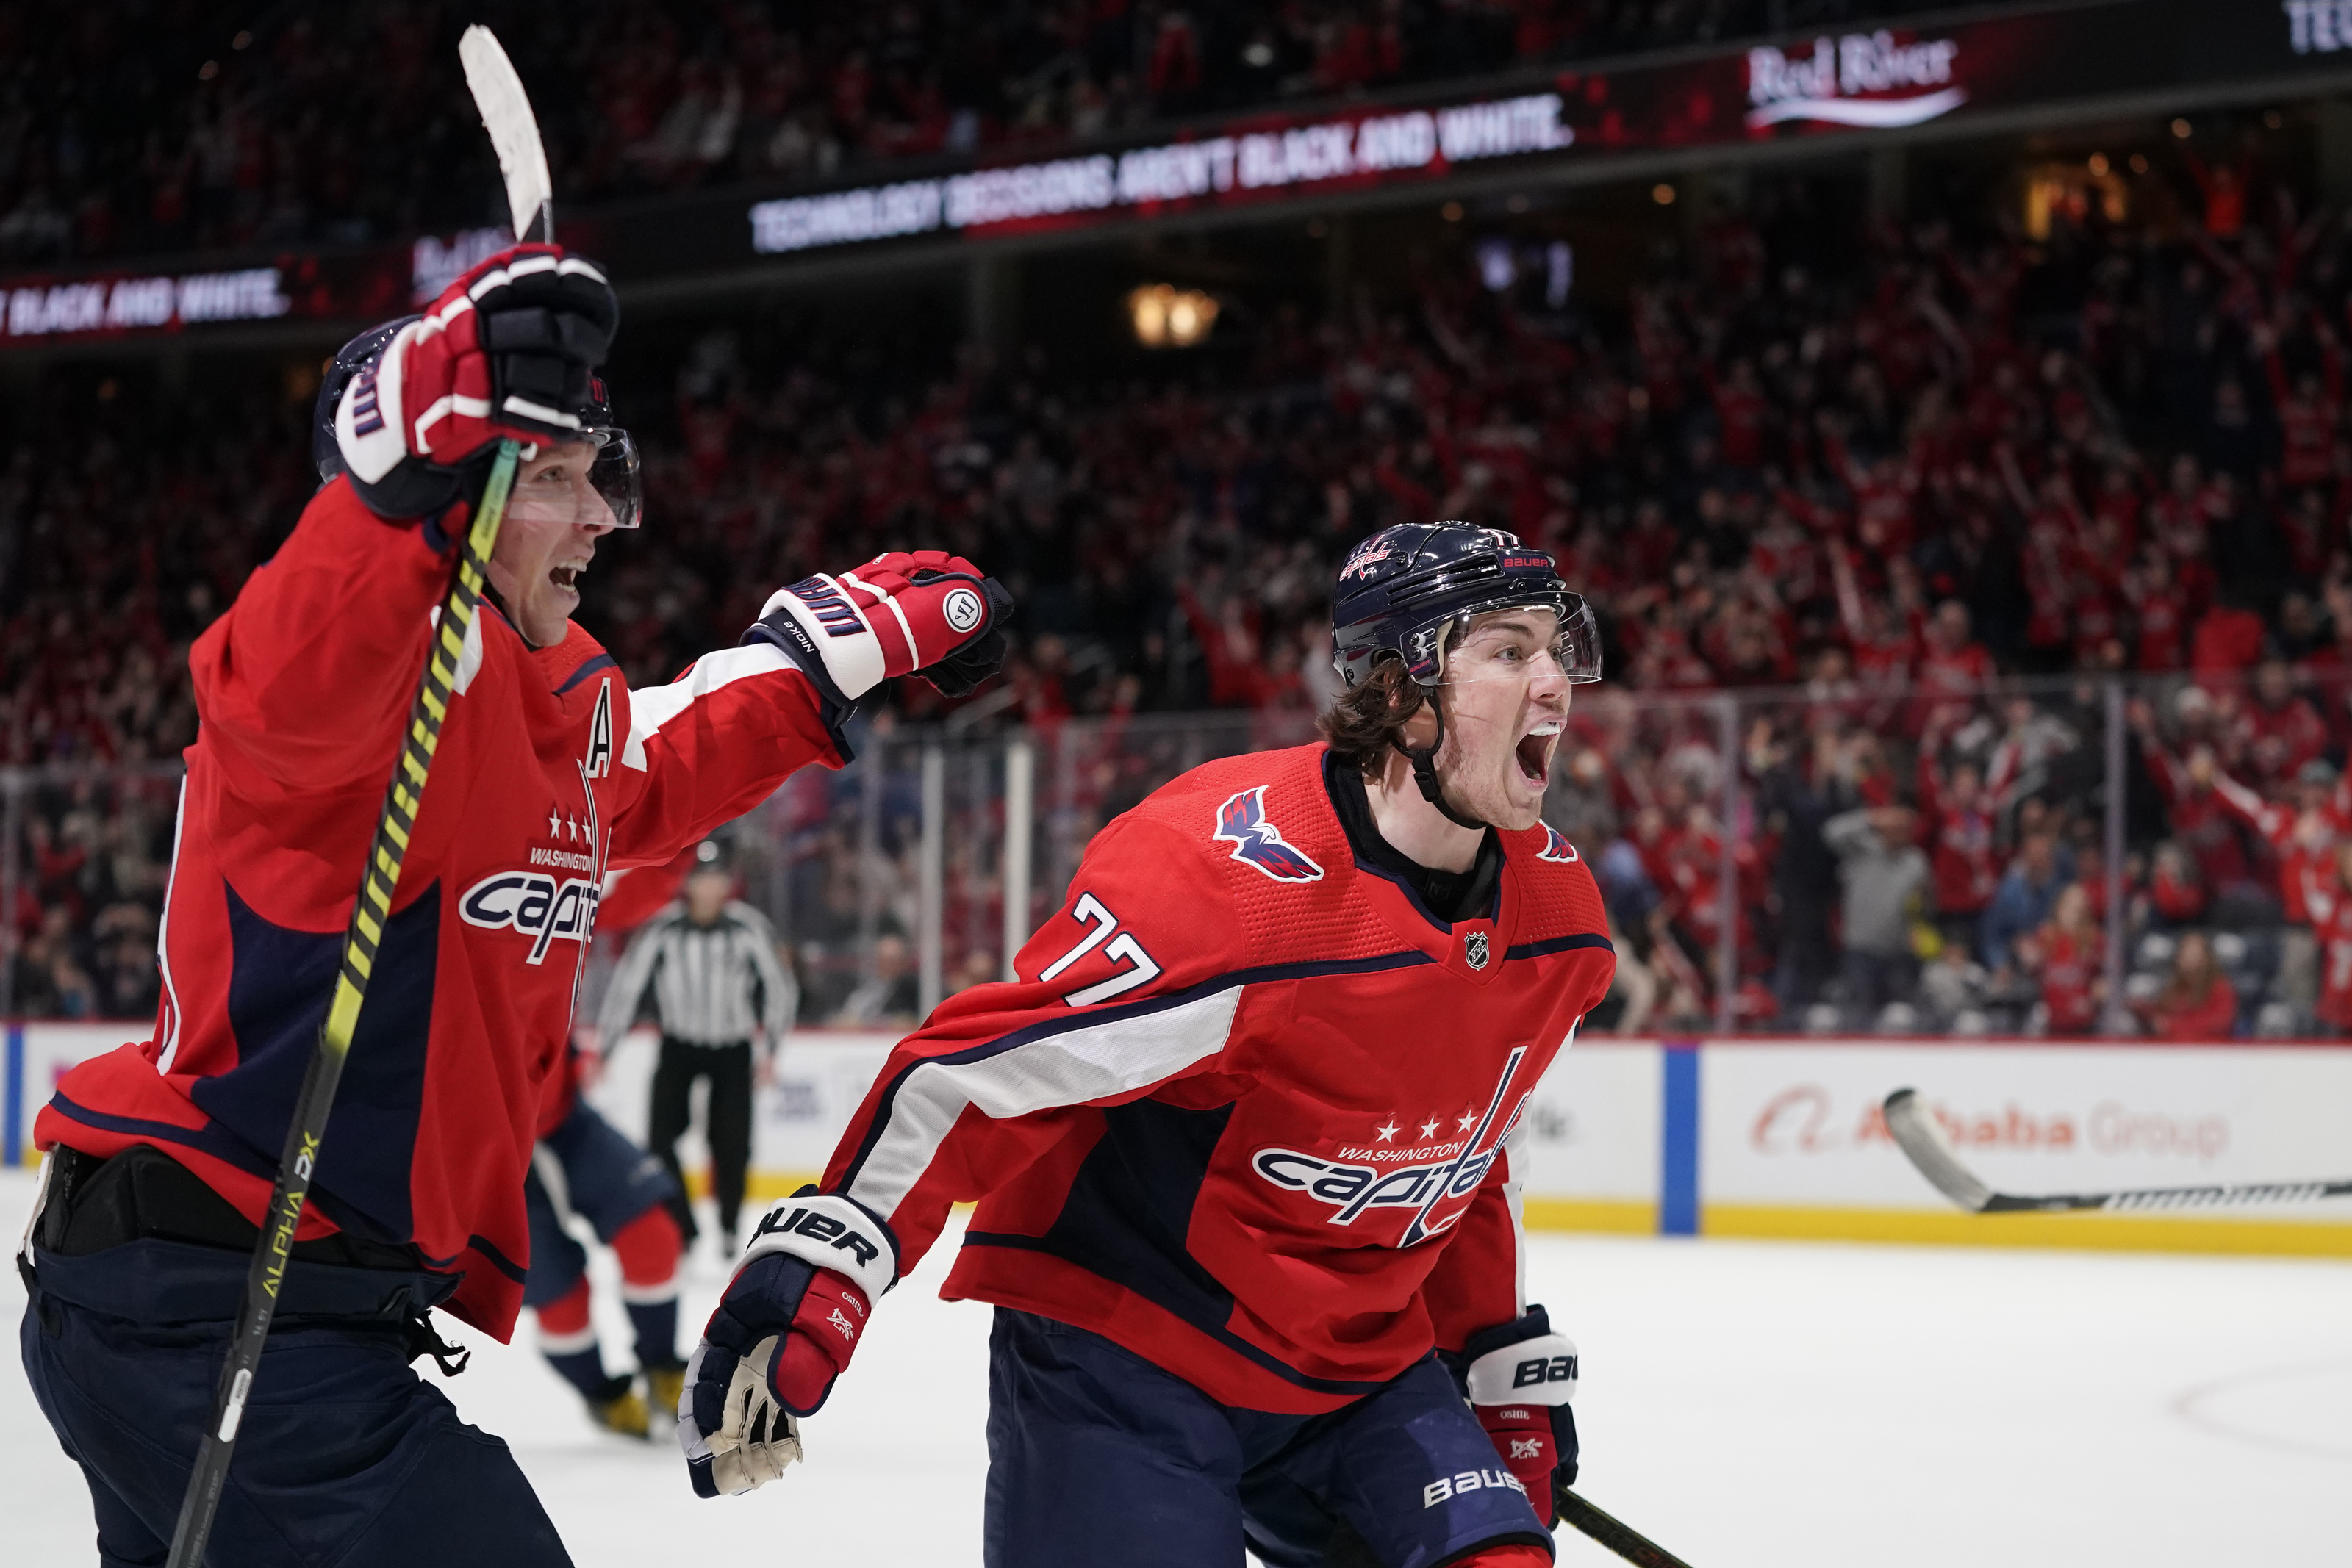 TJ Oshie on recovering from back injury: 'I feel like my old self